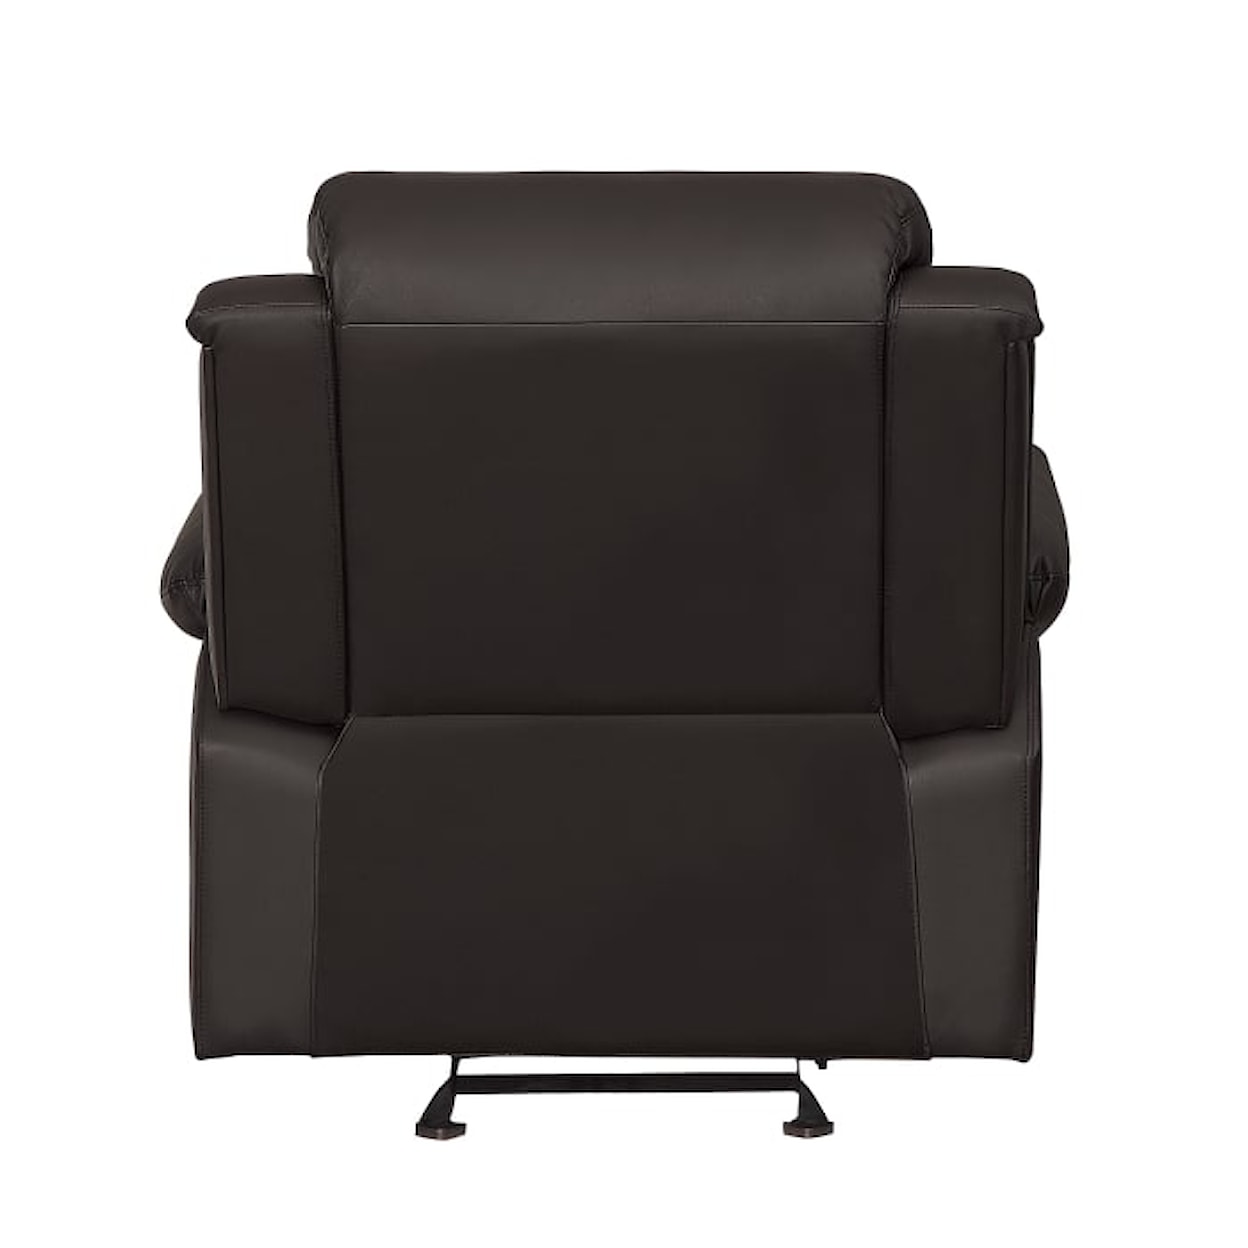 Homelegance Furniture Clarkdale Glider Reclining Chair